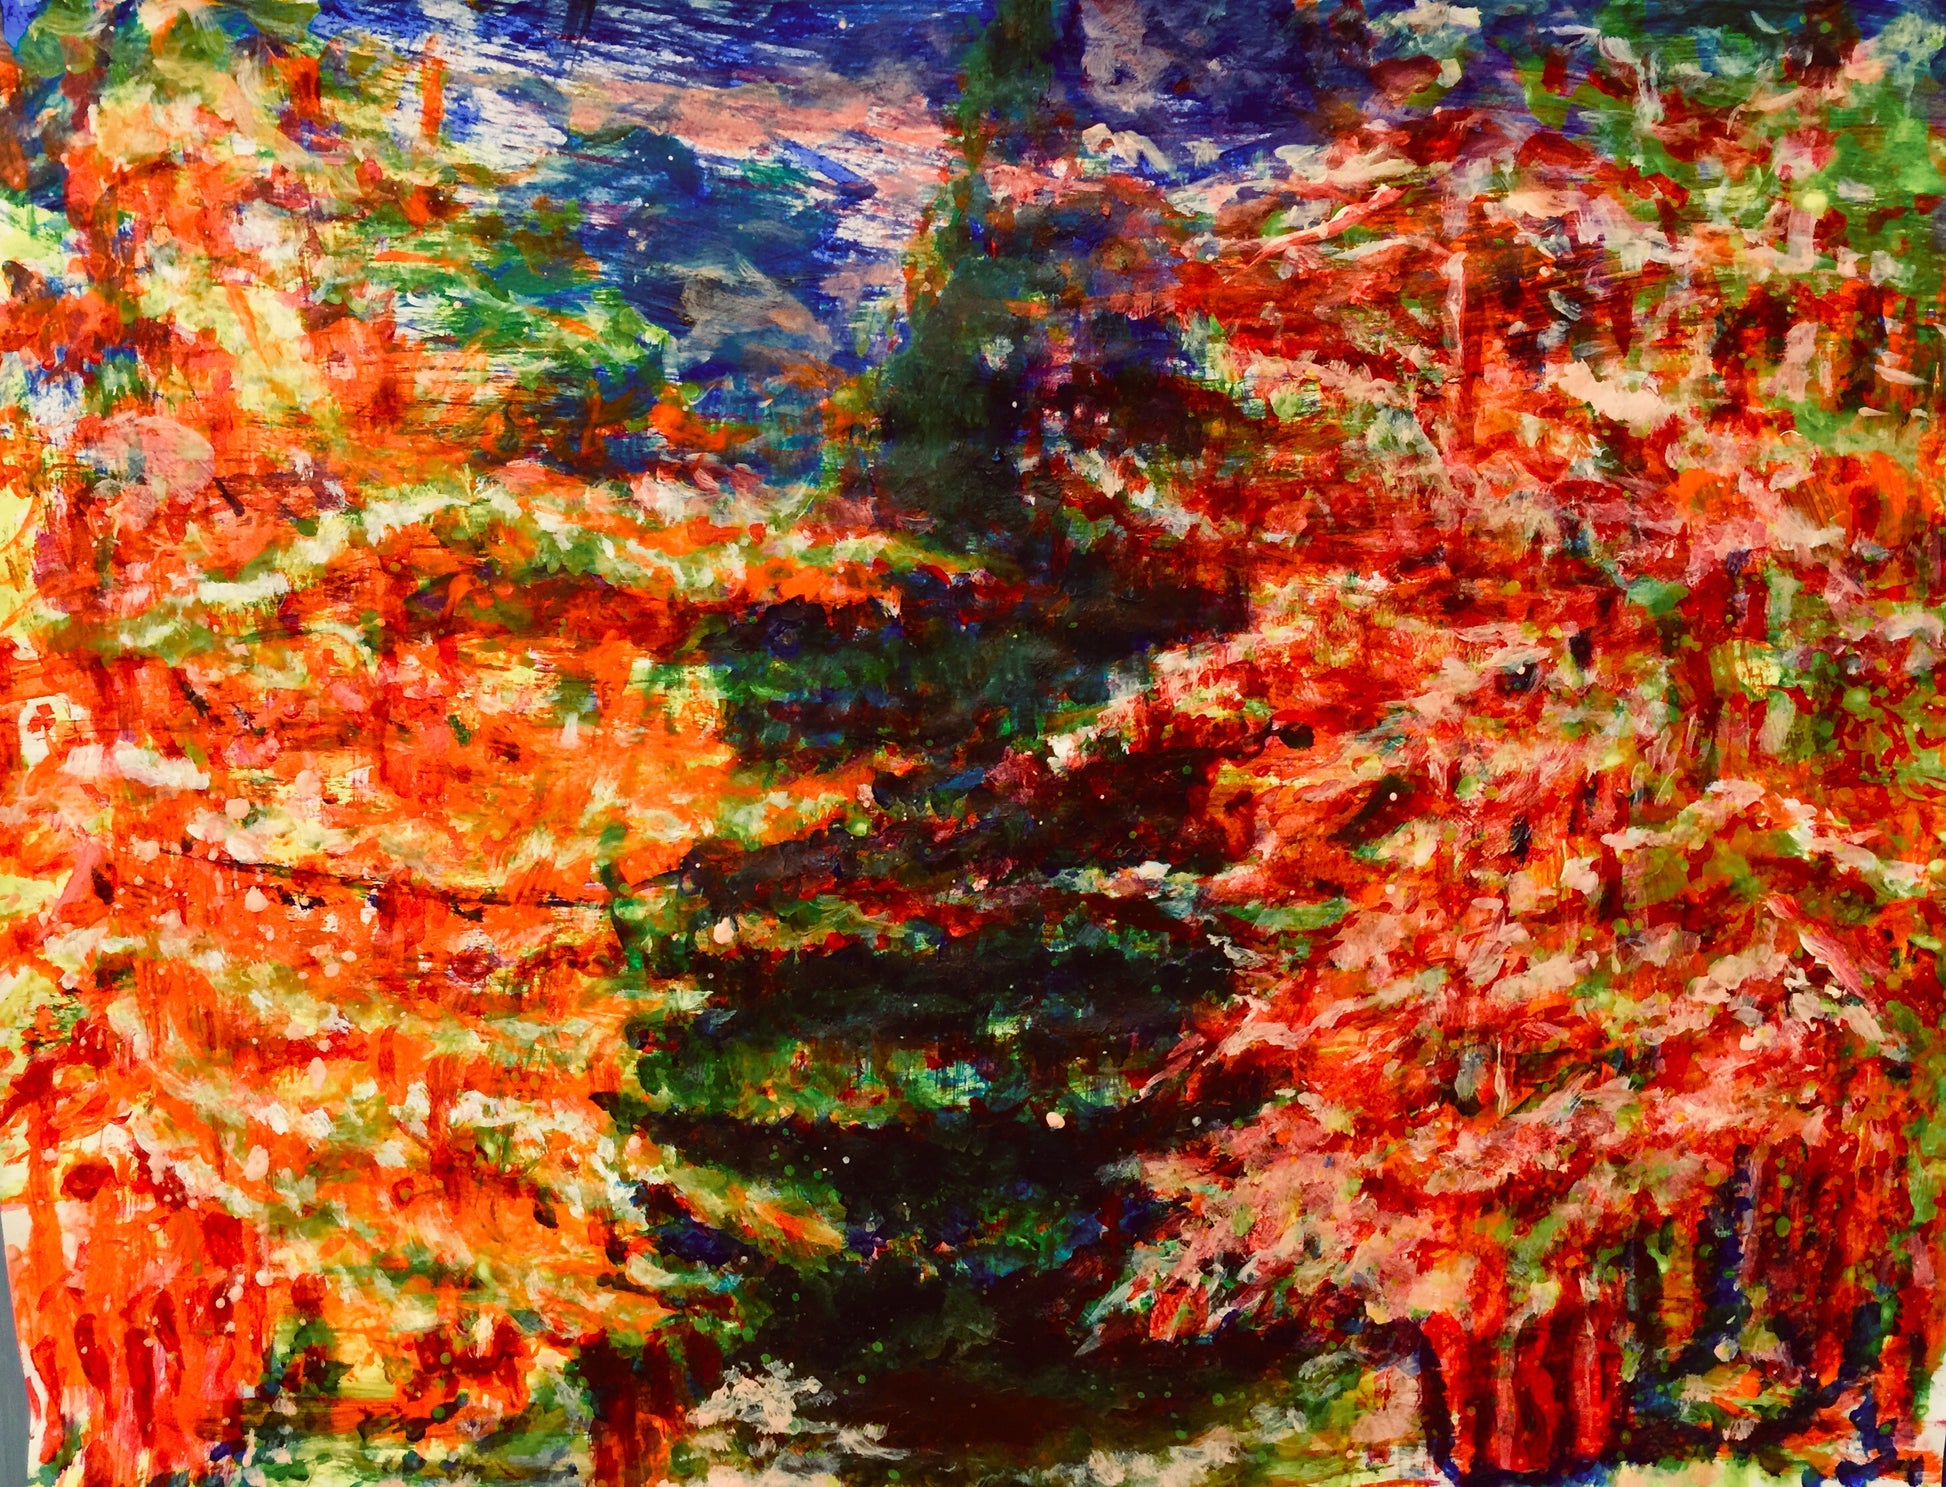 The Divide - Sonarta.com This Sunday afternoon walk through the park is coming to a Divide and now the question is which way to go, Ummmm!!!  This is an Acrylic on Paper painting  by Shahla Rahimi Reynolds.  The Divide is 19” W x 24” H.